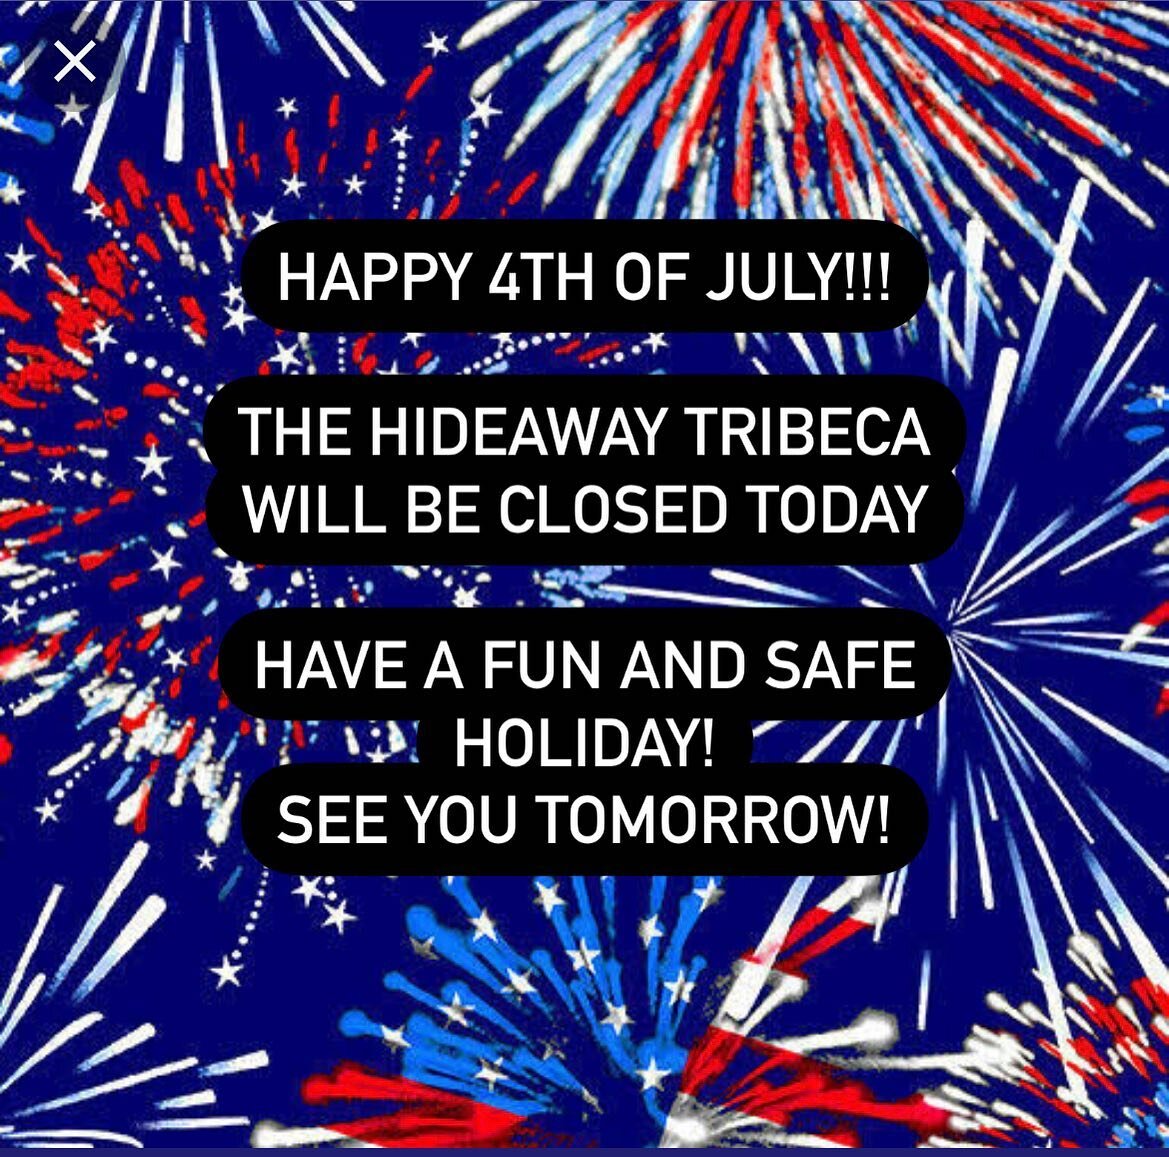 The Hideaway Tribeca will be closed Monday, July 4th. We hope you have a great day with friends and family and look forward to seeing you again tomorrow!